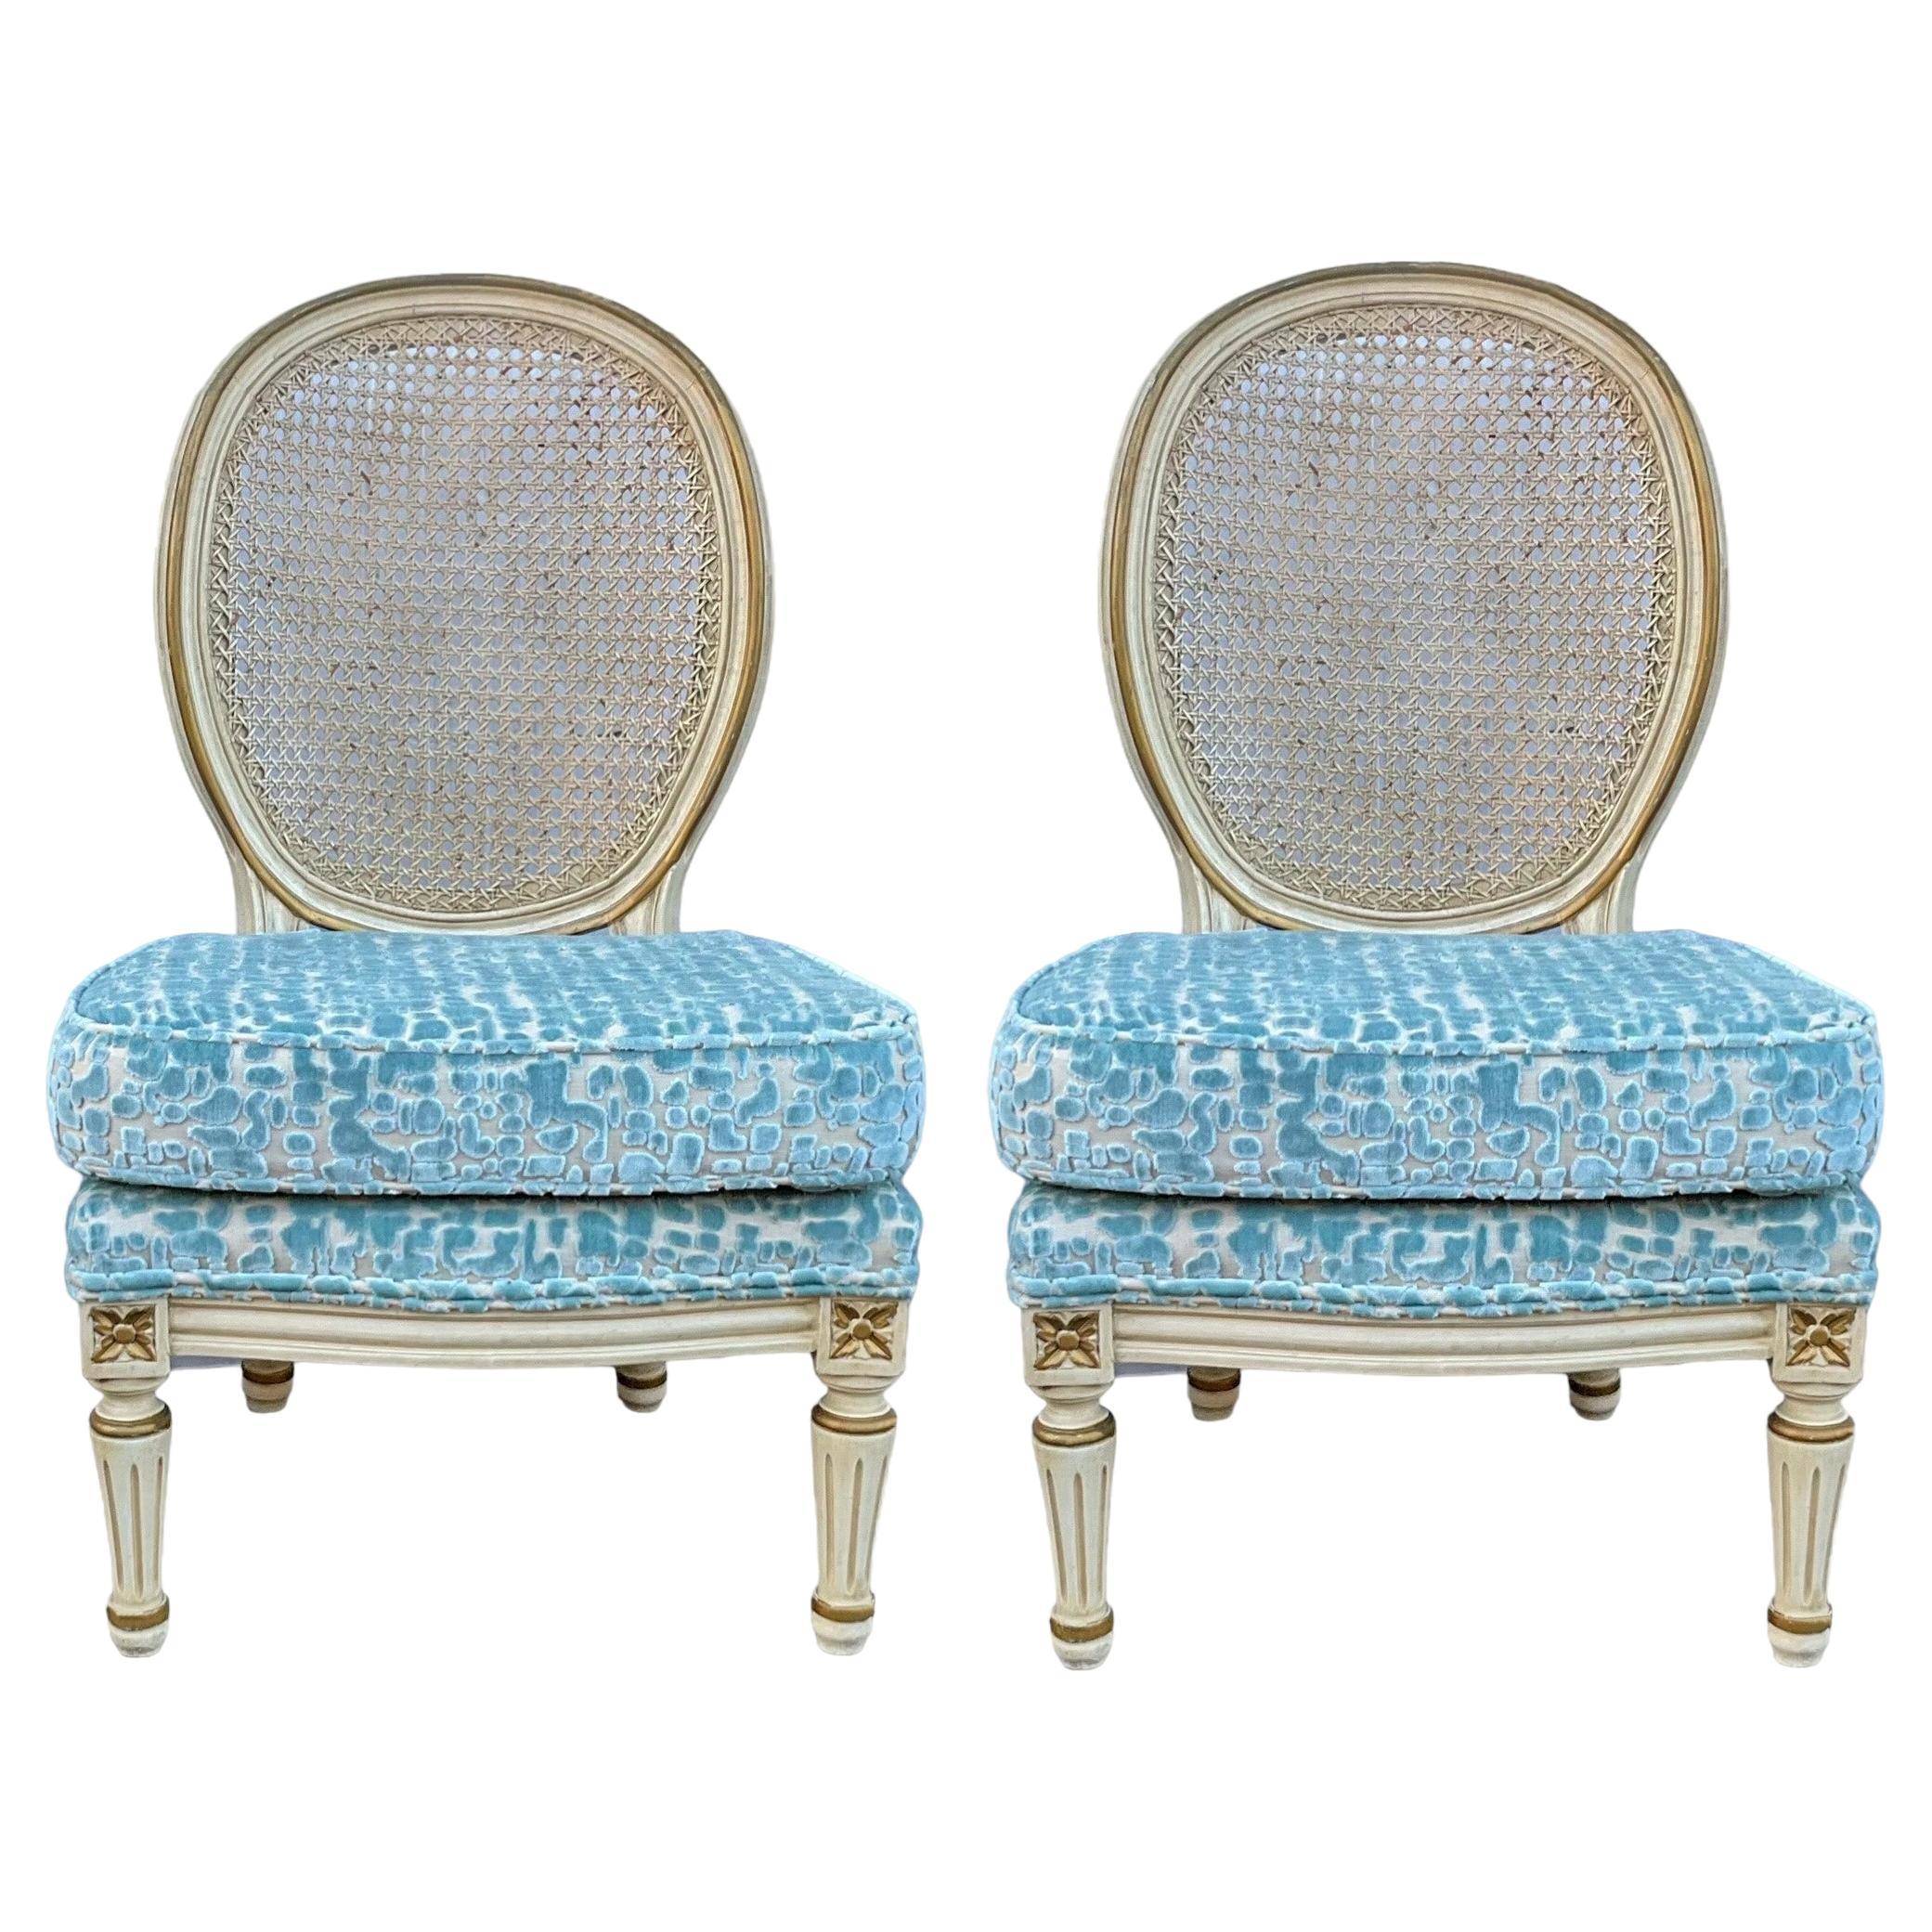 Hollywood Regency Era French Style Painted Slipper Chairs In Cut Velvet -Pair For Sale